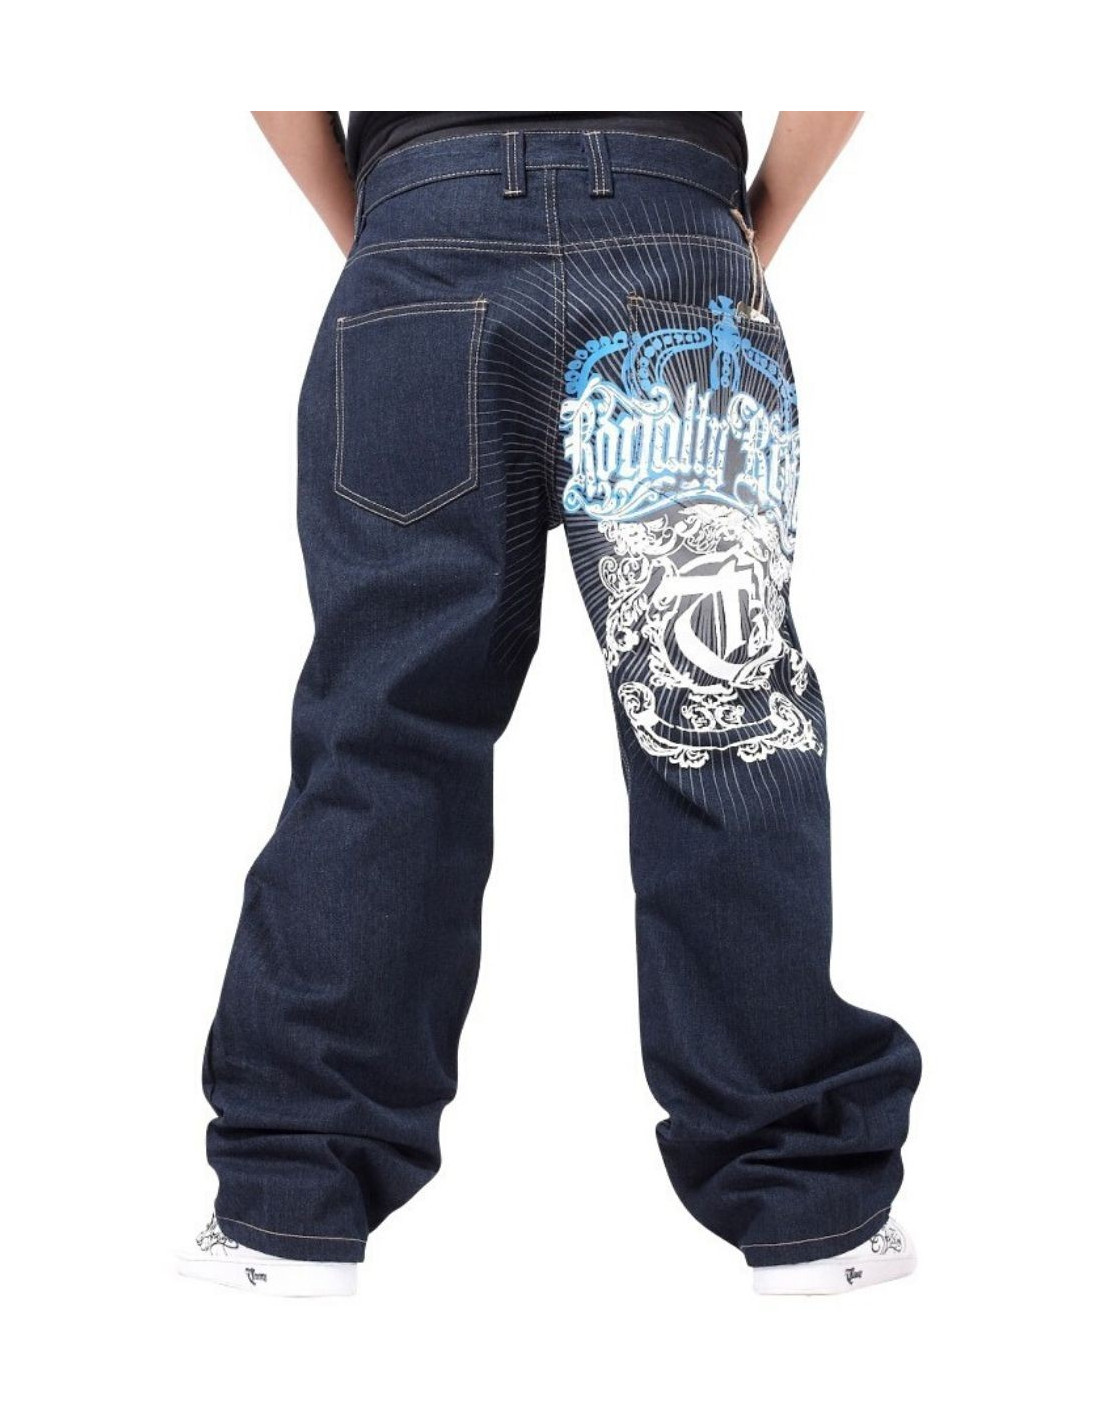 Classic Baggy Jeans Royalty Reigns navy - B-grade item